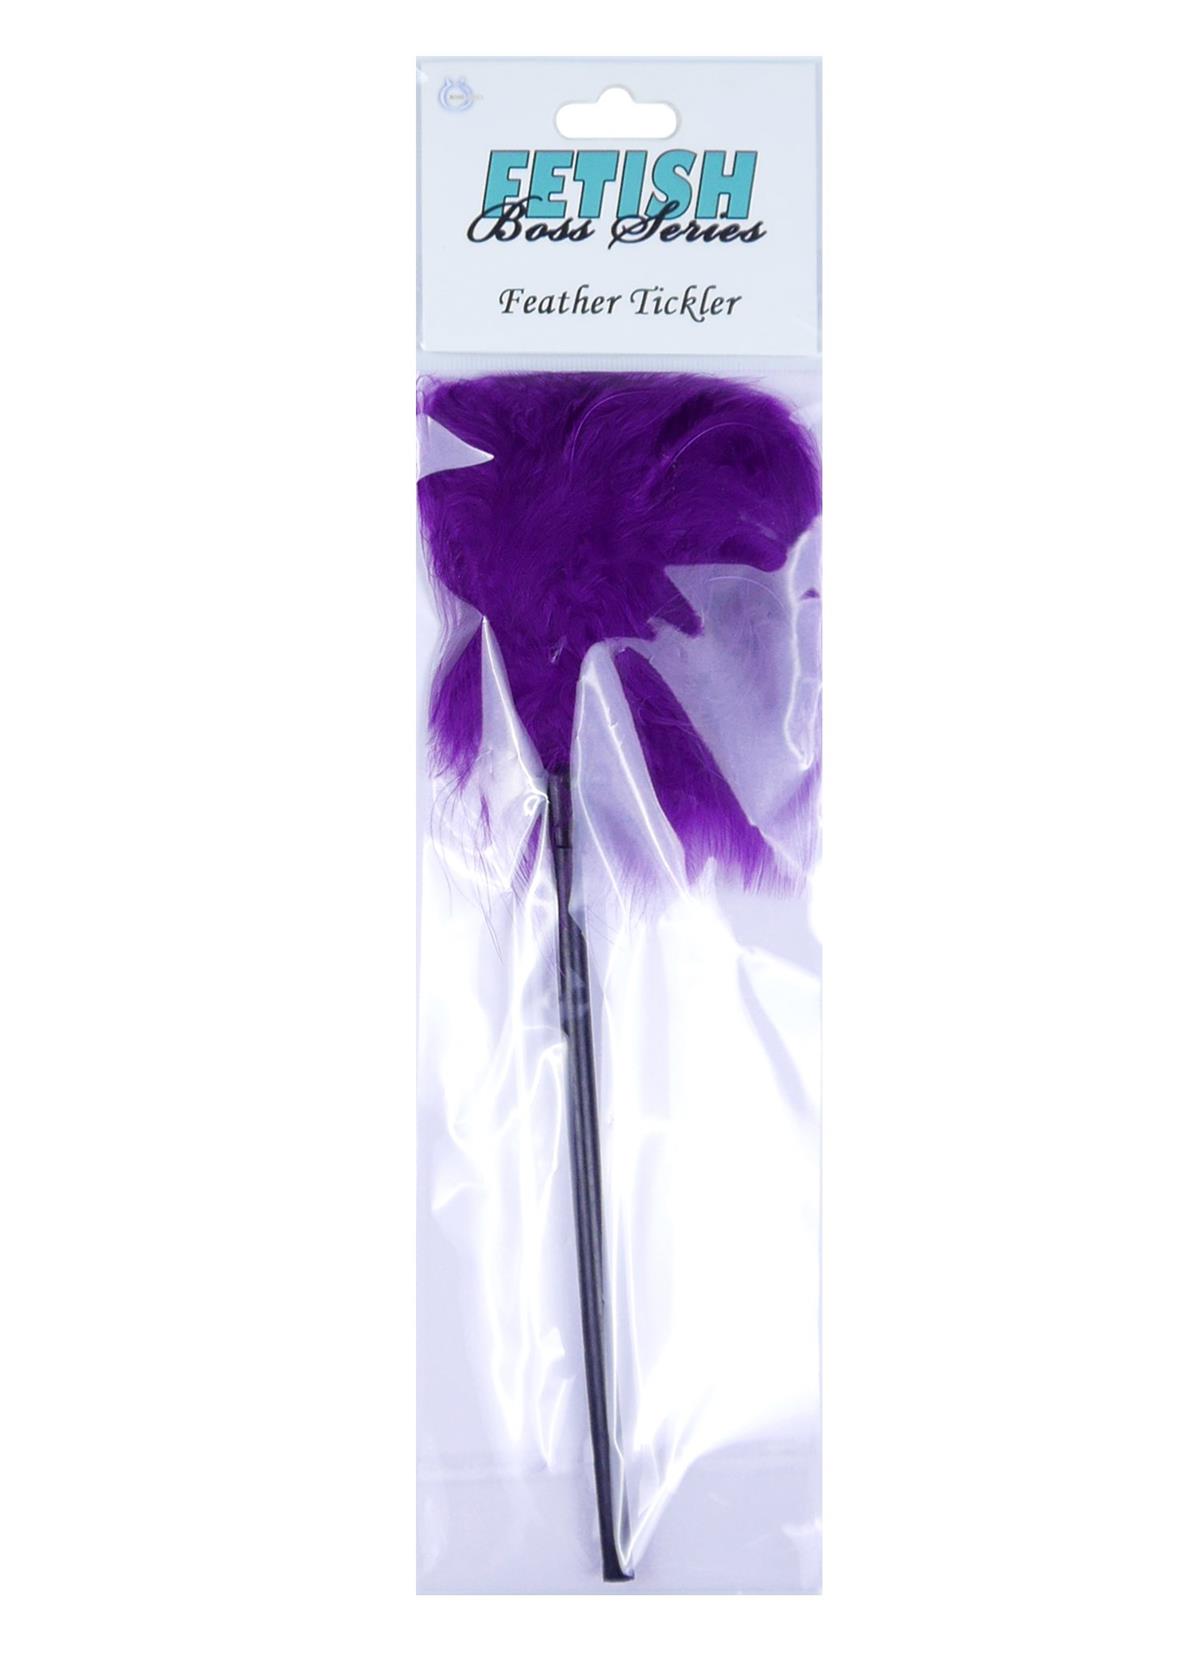 Bossoftoys - 61-00030 - Feather Tickler - Fetish Power - Purple - Colour Packing